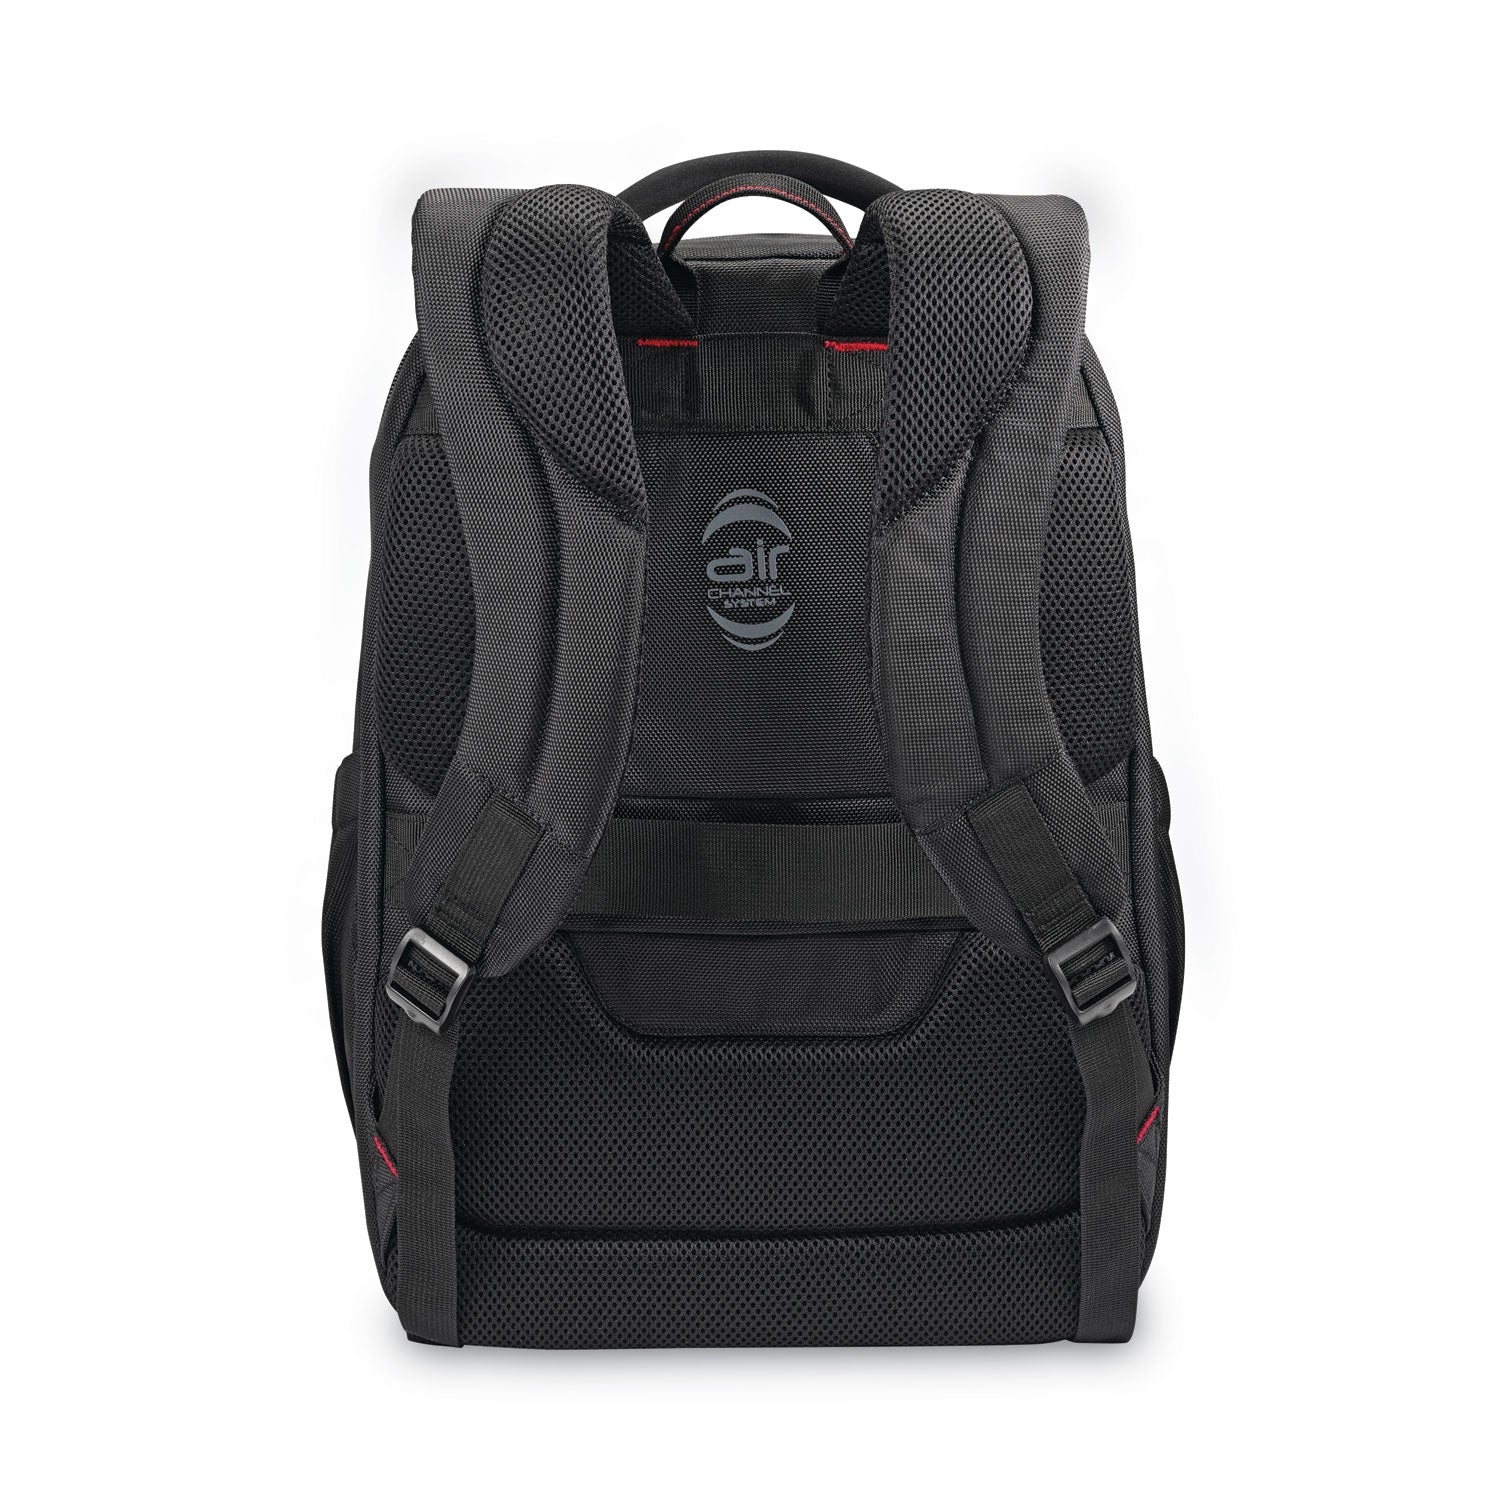 xenon-3-laptop-backpack-fits-devices-up-to-156-ballistic-polyester-12-x-8-x-175-black_sml894311041 - 7